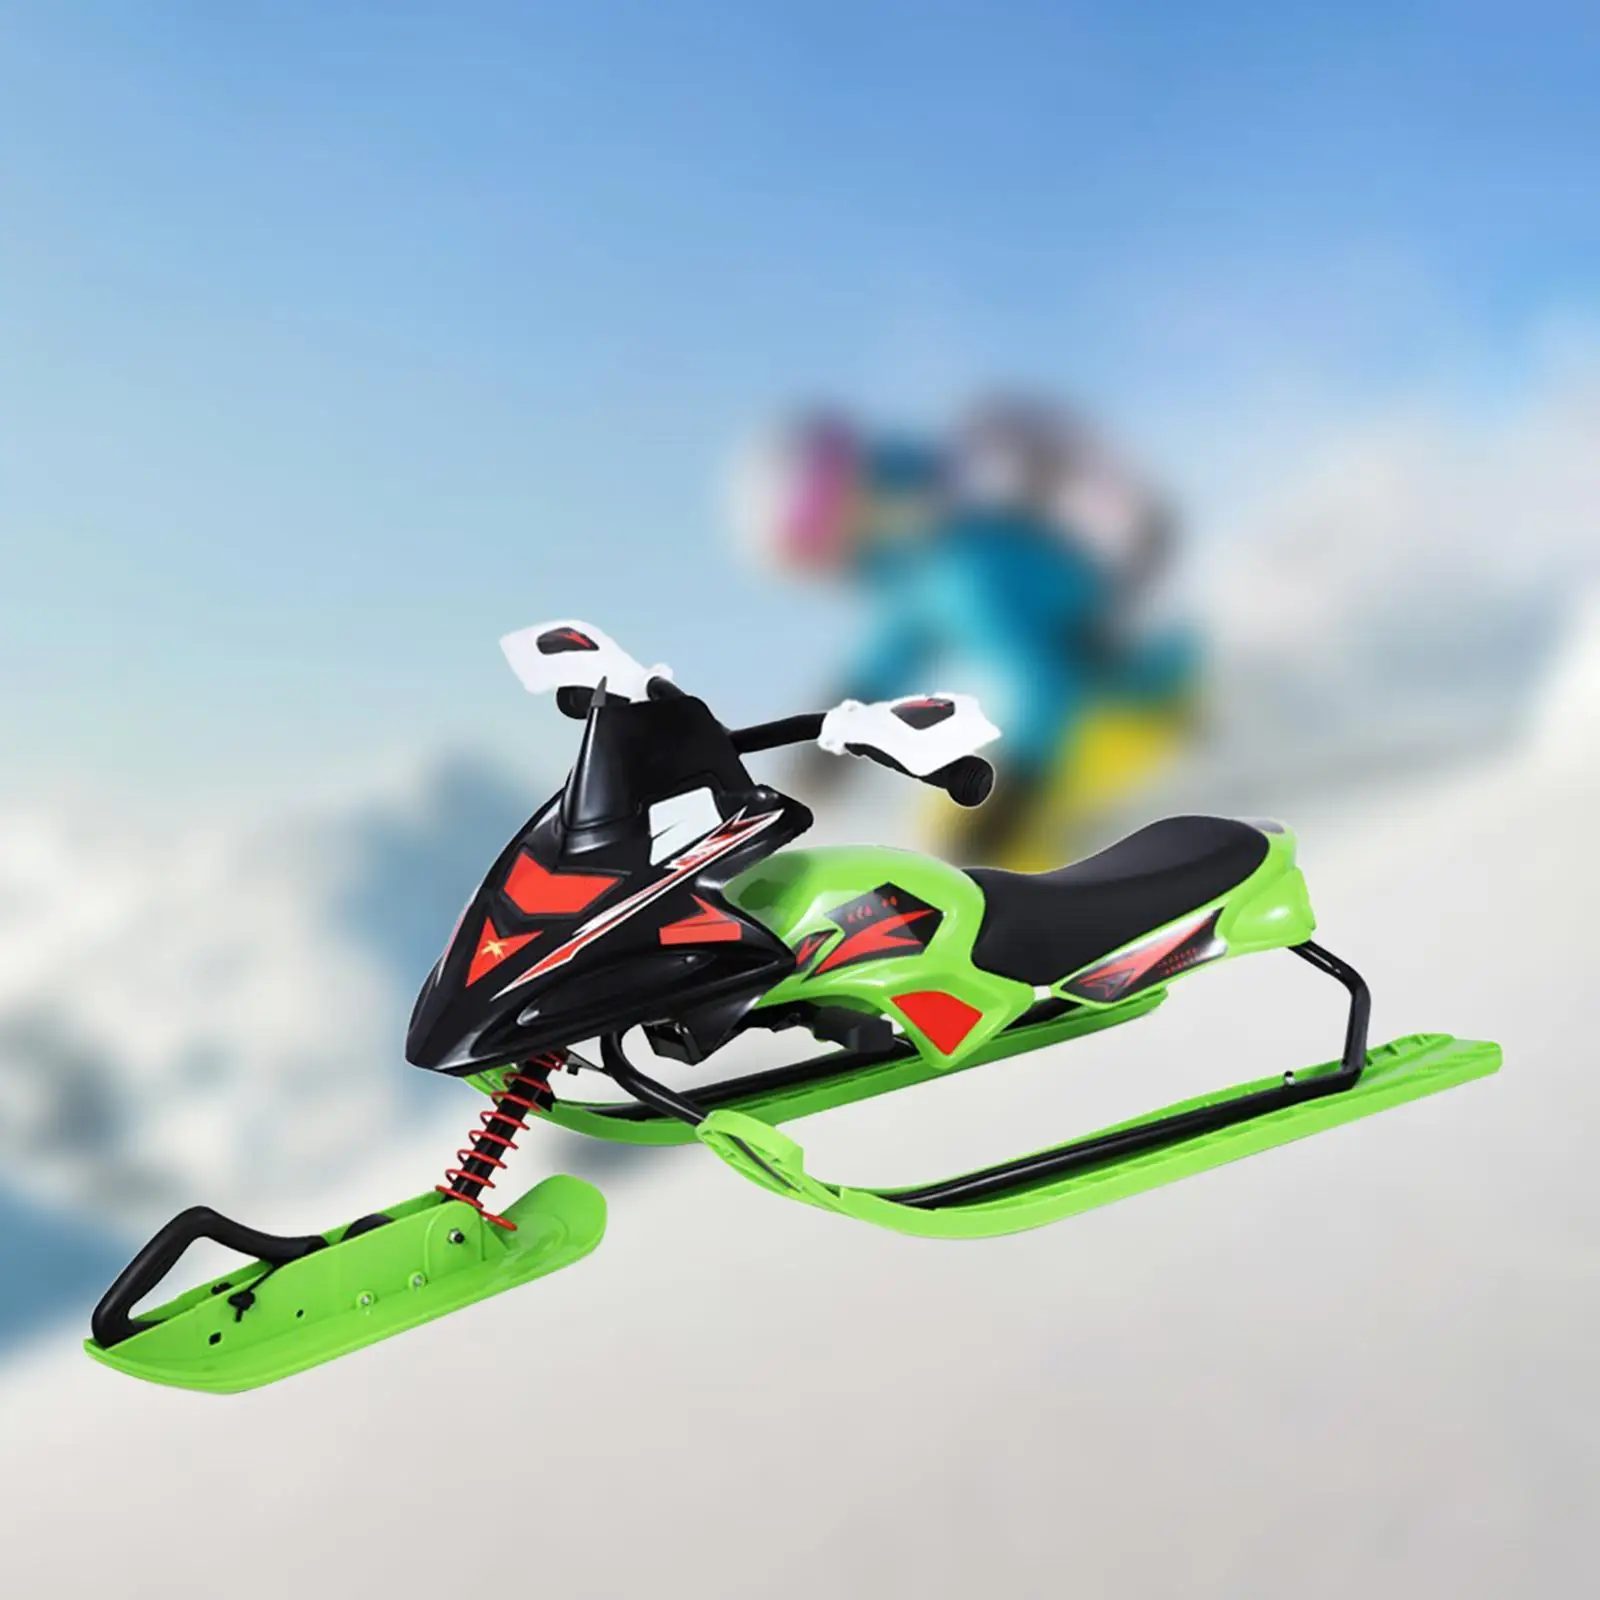 Snow Racer with Steering Wheel and Twin Brakes Snow Sled for Downhill and Uphill Snowboard Ski Sled for Outdoor Activities Kids